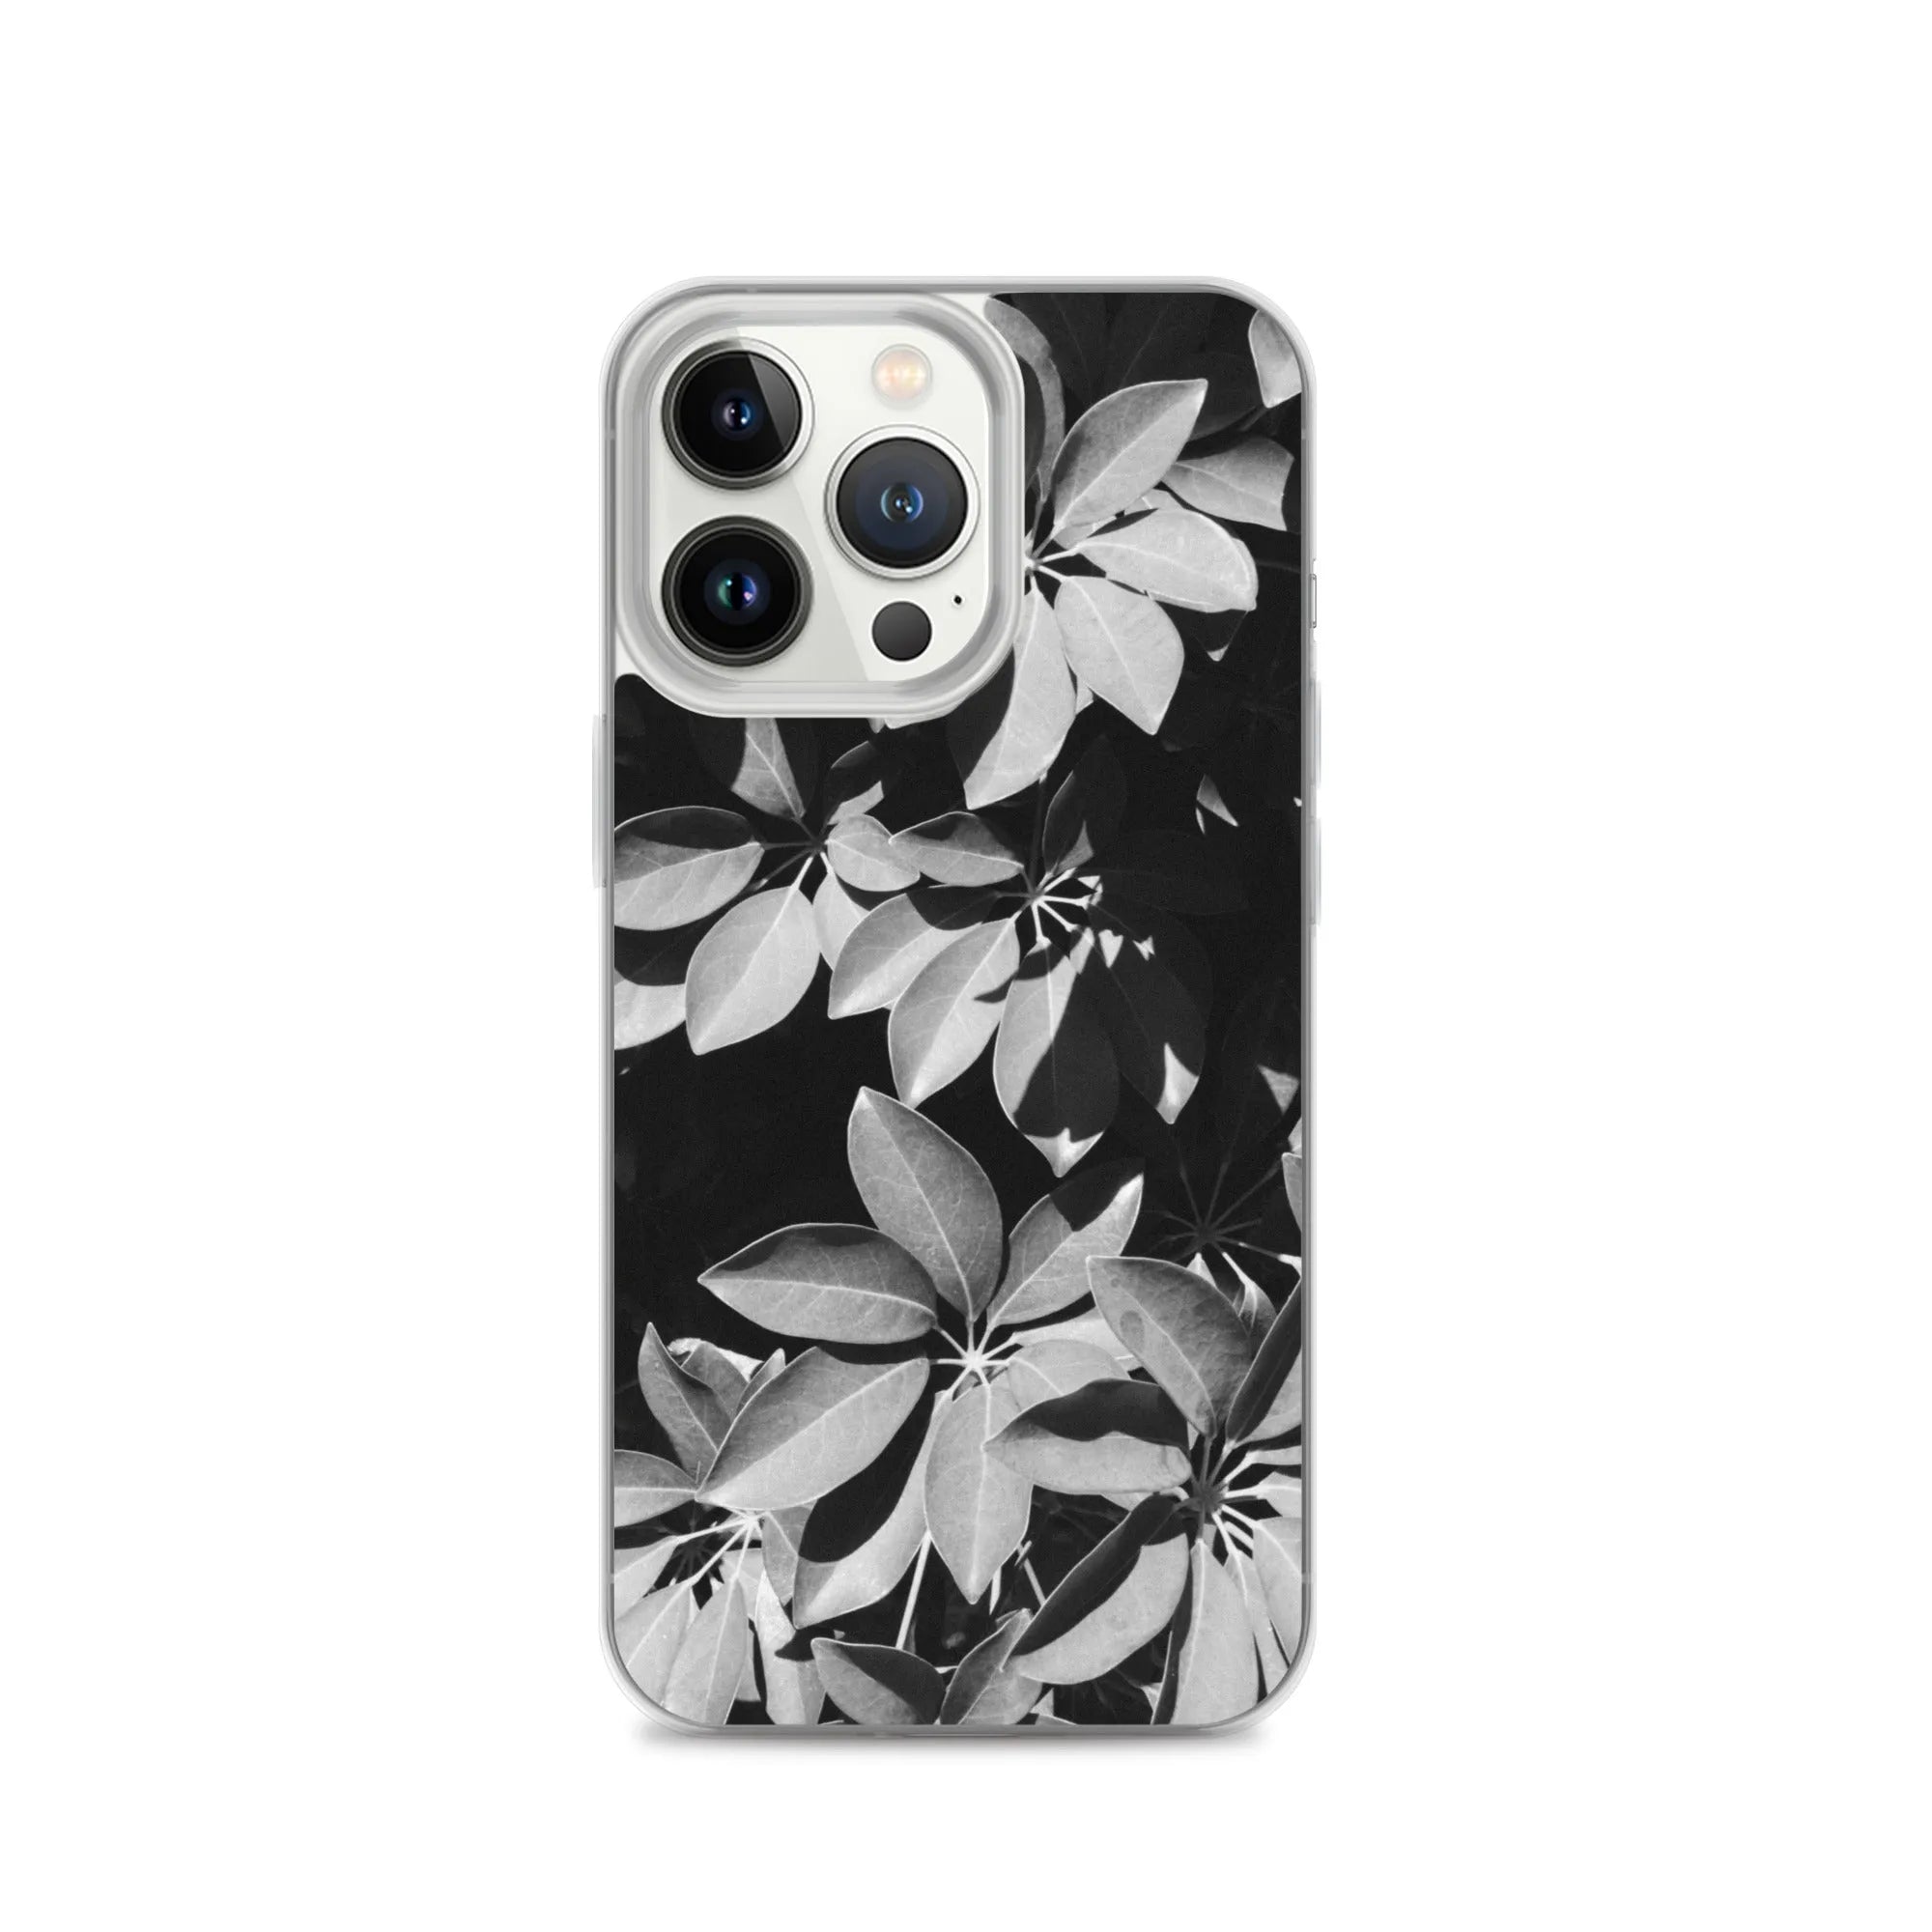 Fanfare Botanical Art Iphone Case - Black And White - Iphone 13 Pro - Mobile Phone Cases - Aesthetic Art